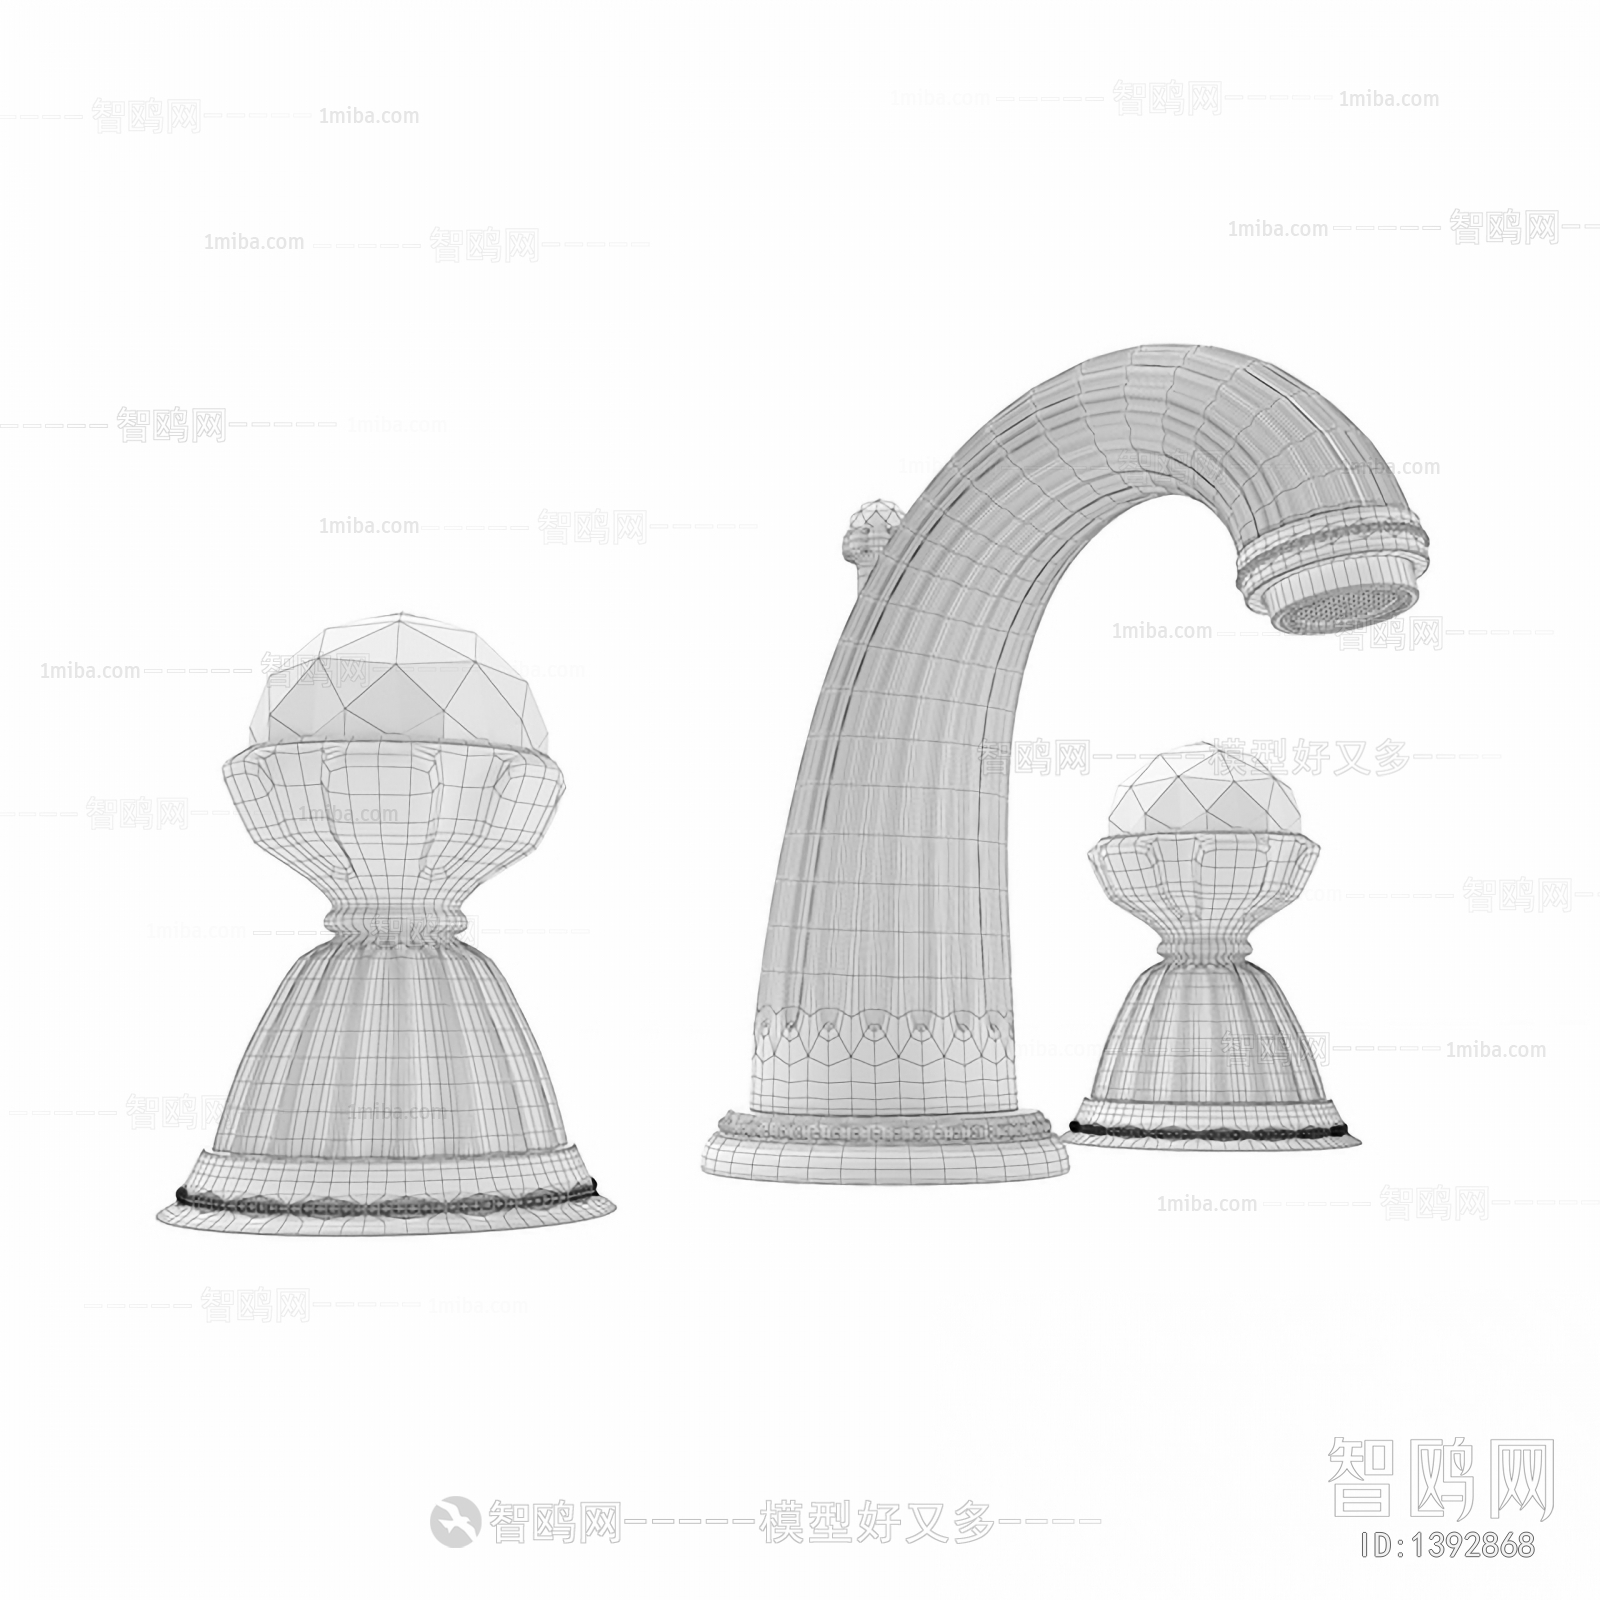 European Style Kitchen And Bathroom Components